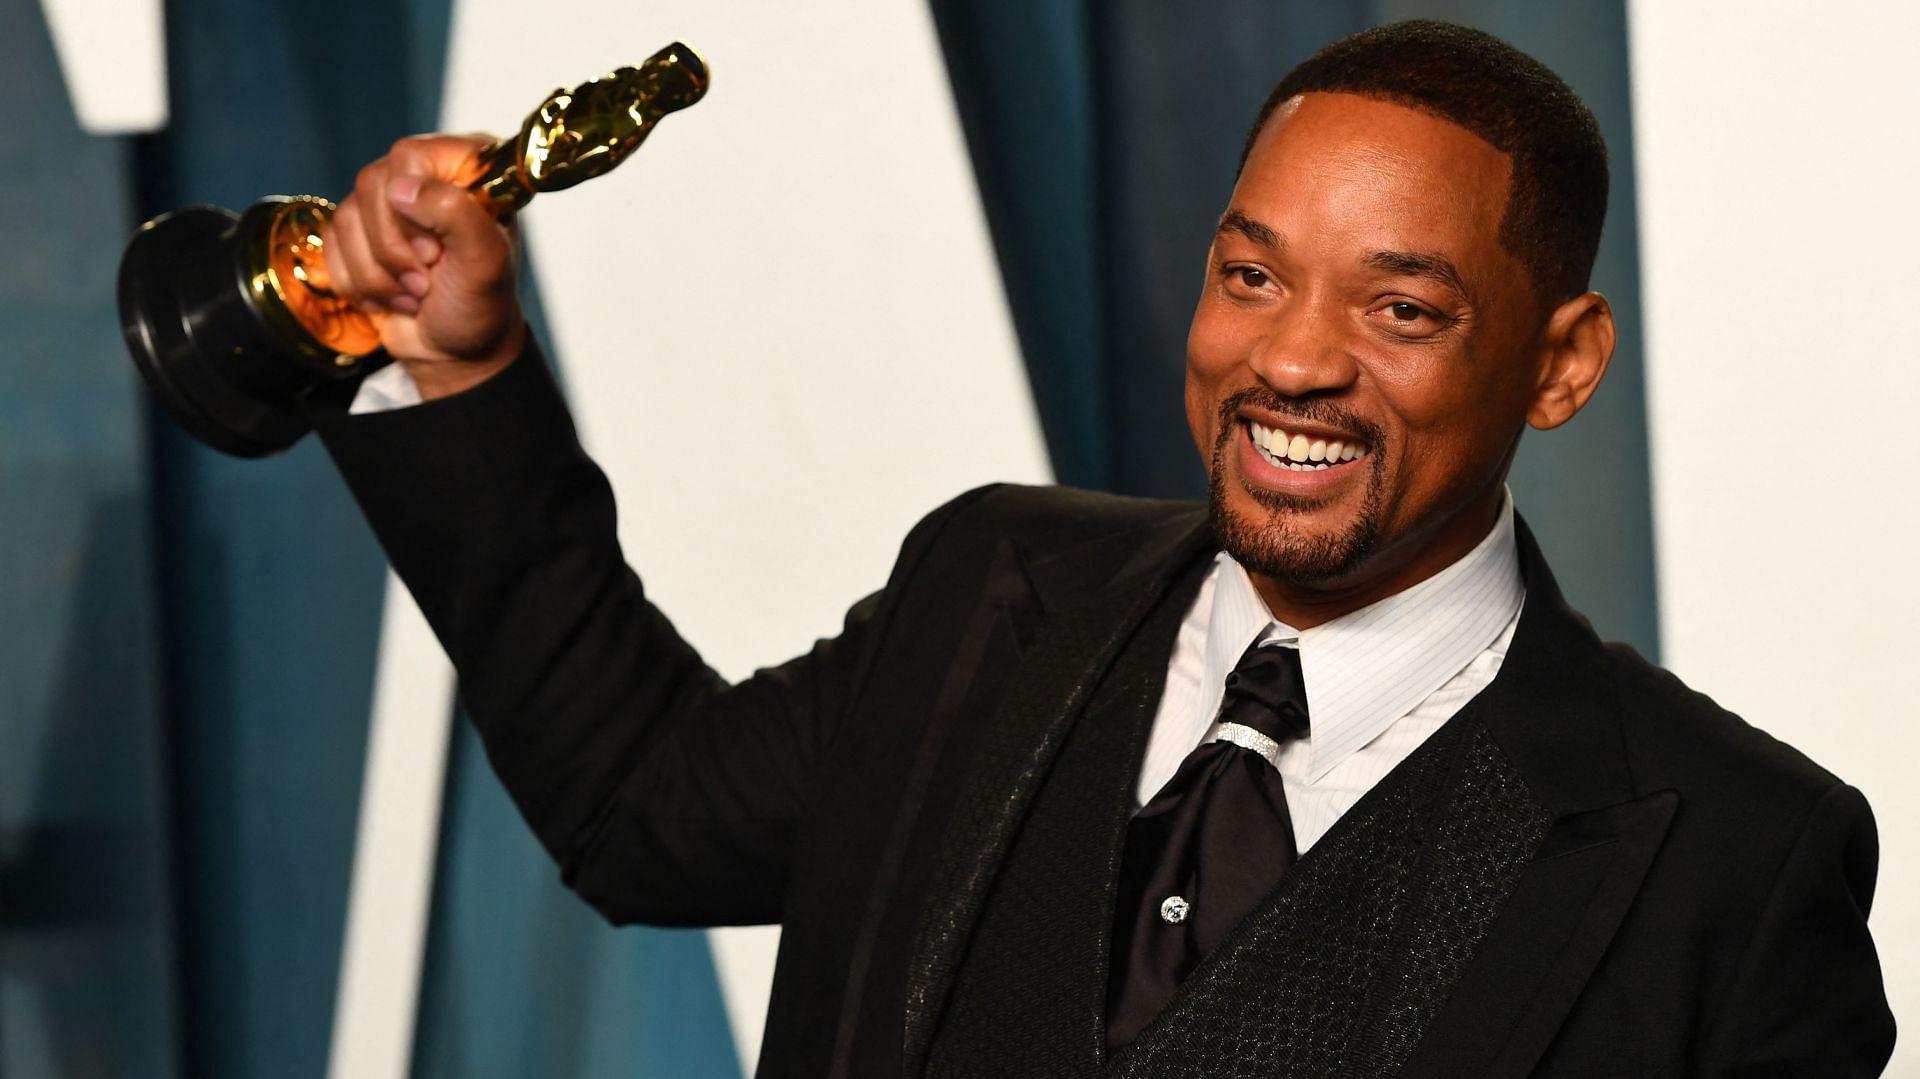 Will Smith has the potential for action roles (Image credit Getty Images)